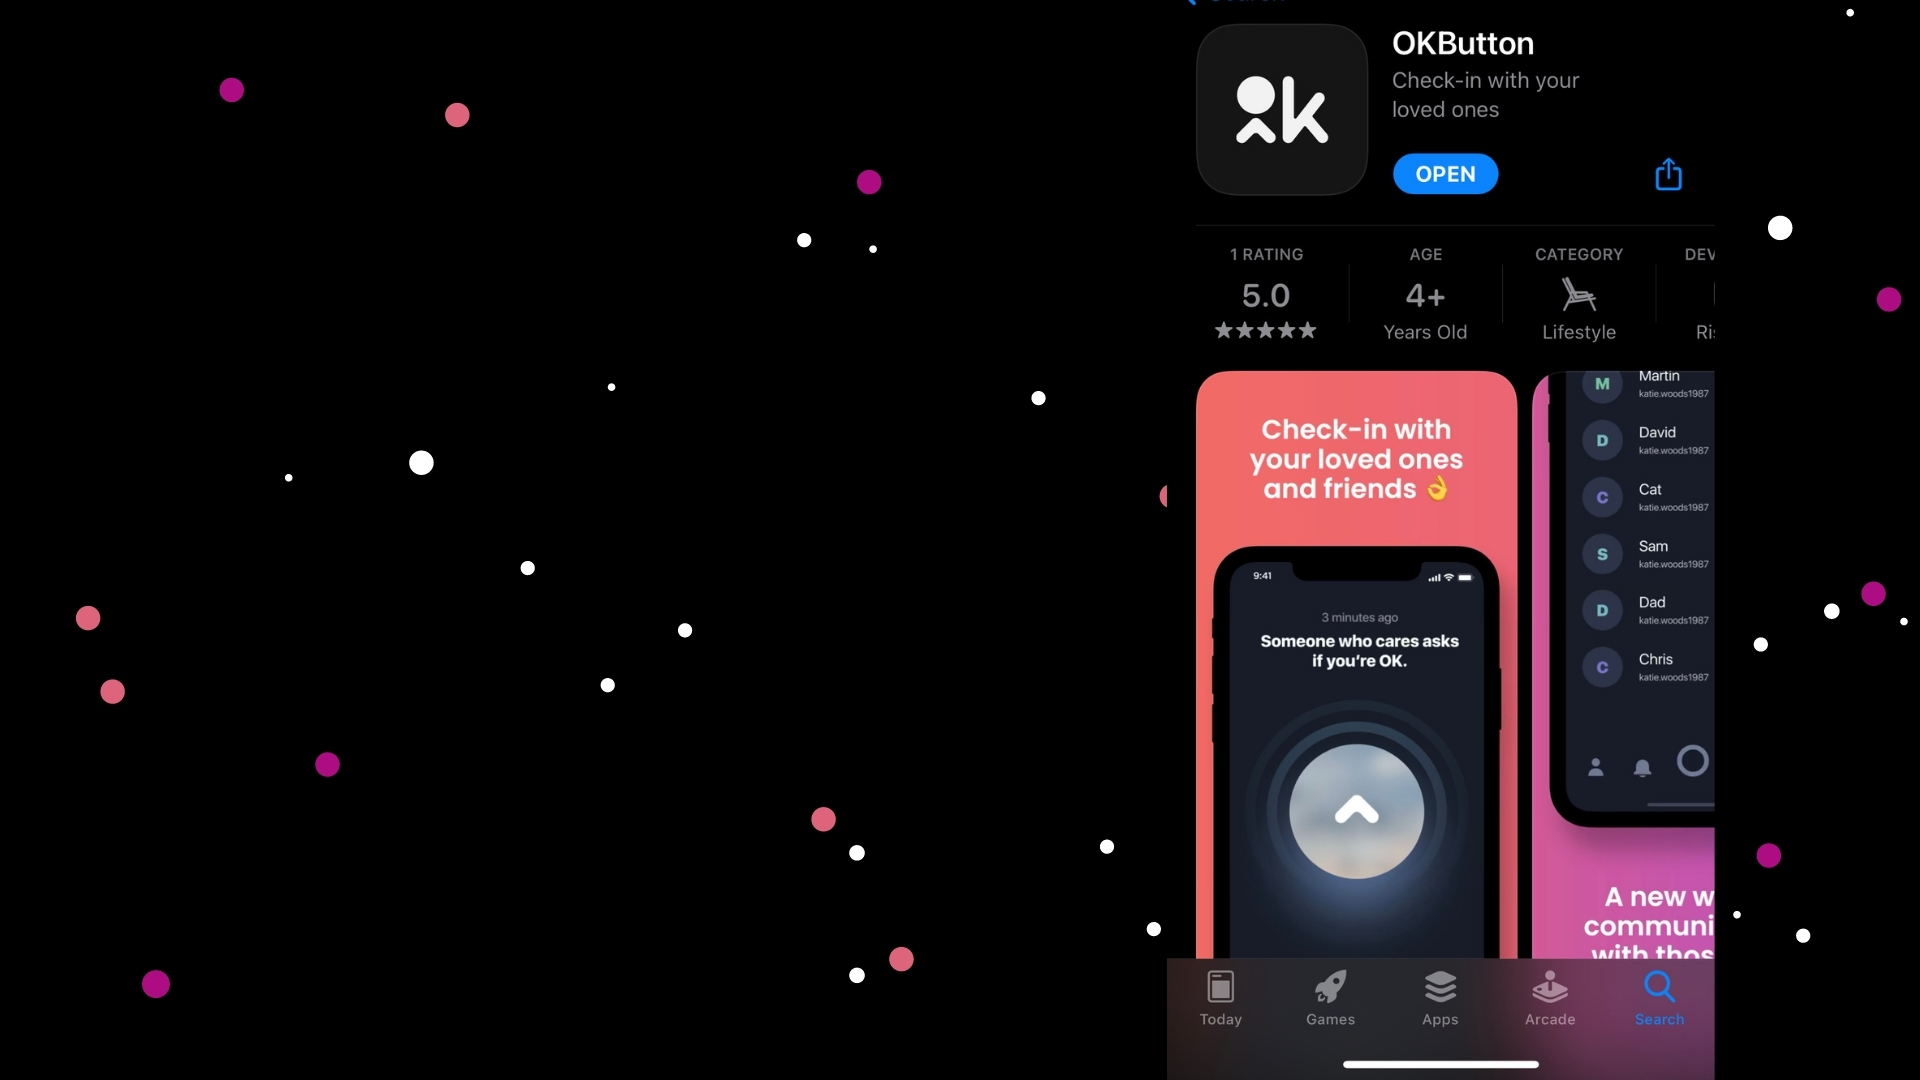 Version 1.0 of the OKButton is now in the iOS App Store